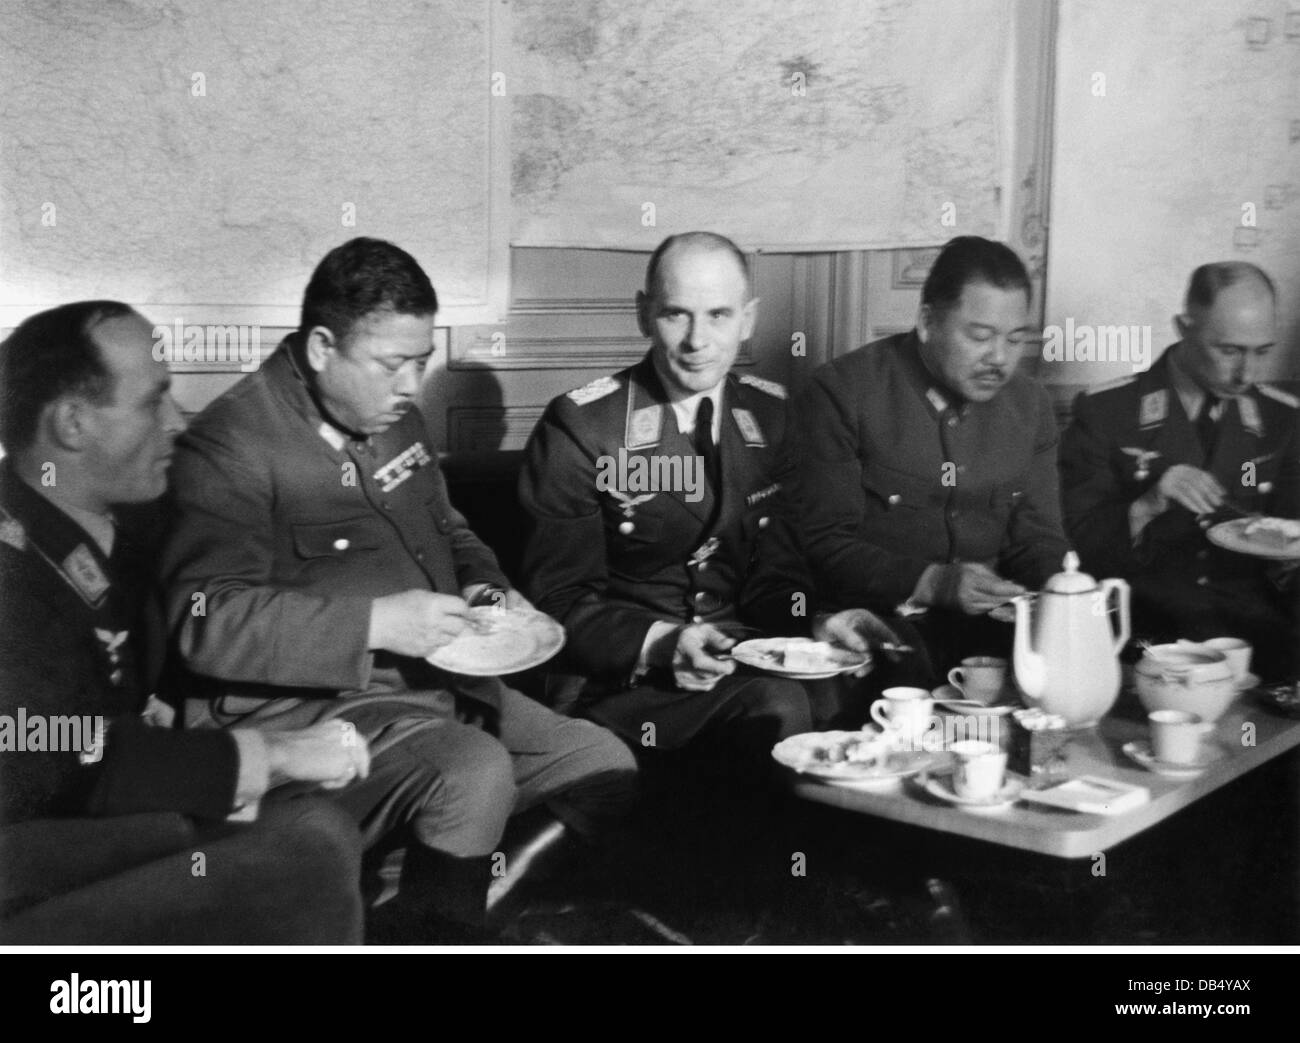 Nazism / National Socialism, politics, Tripartite Pact, visit of the Japanese general Yamashita Tomoyuki at the II group of 53rd German Bomber Wing, Calais area, France, December 1940, Additional-Rights-Clearences-Not Available Stock Photo